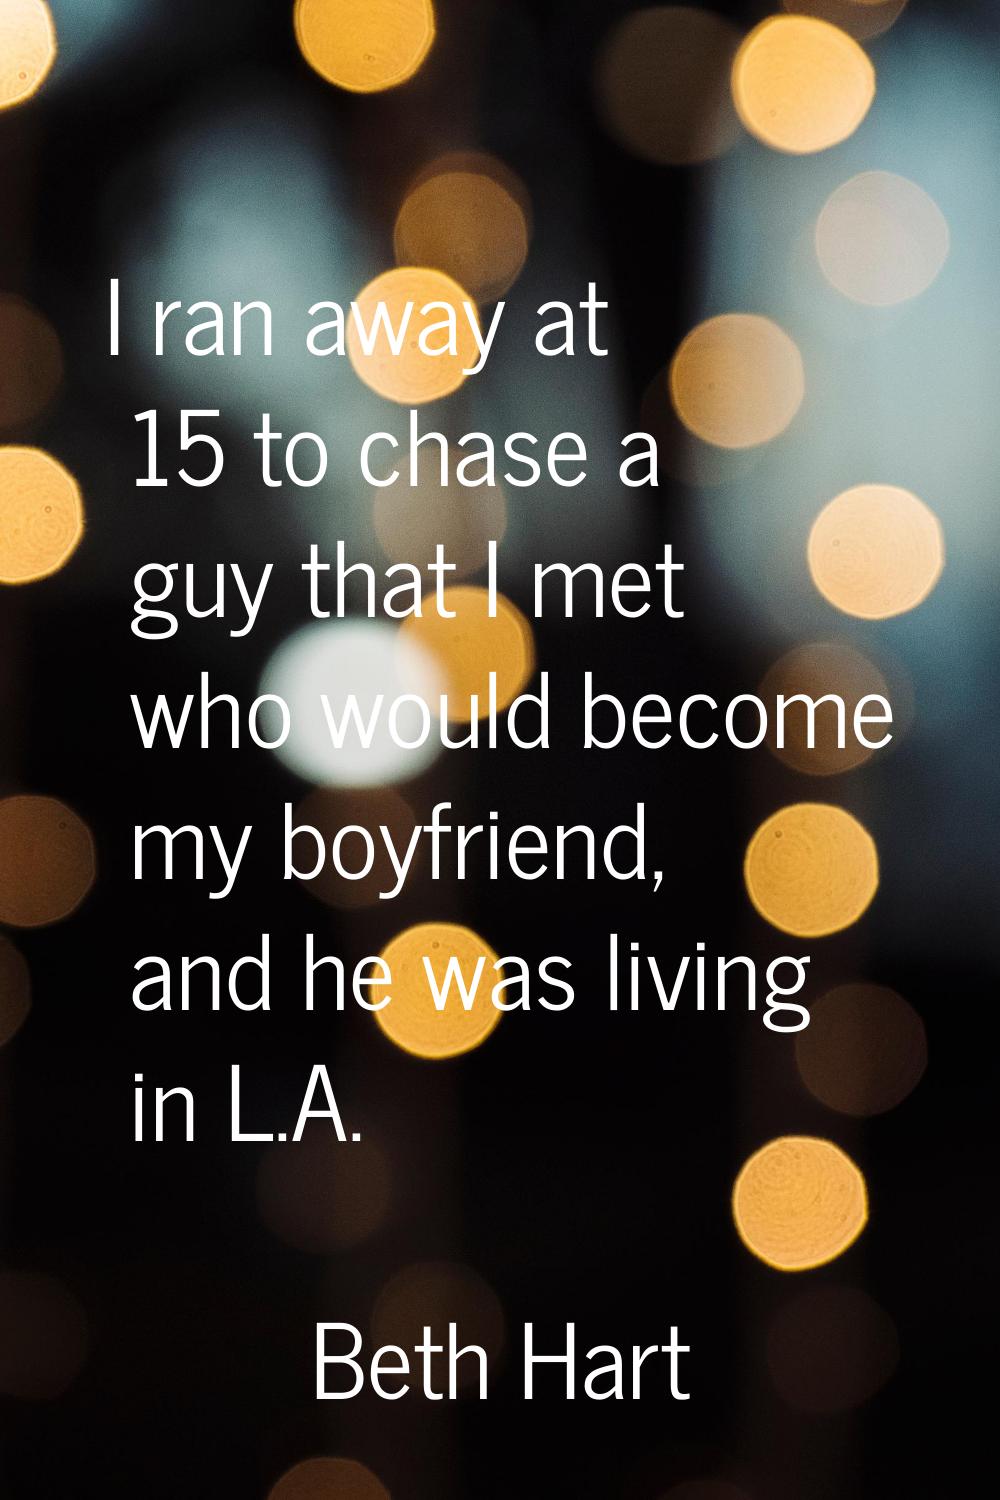 I ran away at 15 to chase a guy that I met who would become my boyfriend, and he was living in L.A.